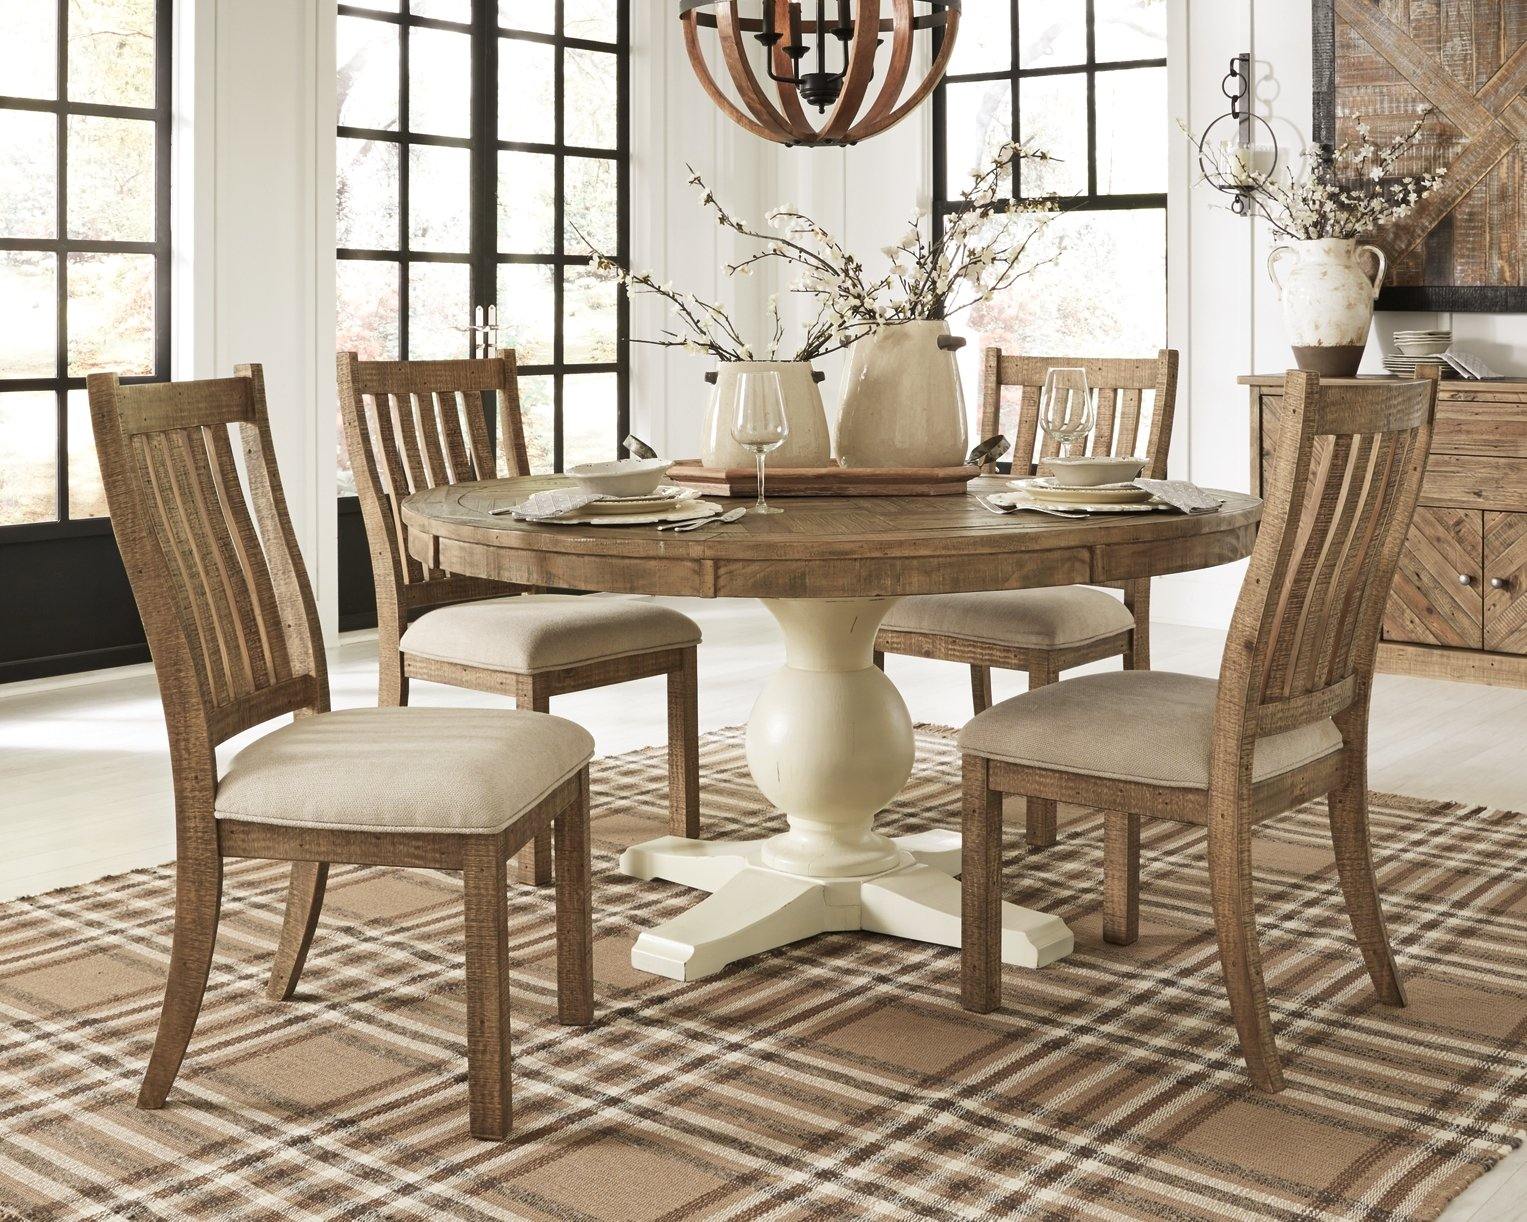 Grindleburg Dining Chair D754-05 Light Brown Casual formal seating By ashley - sofafair.com